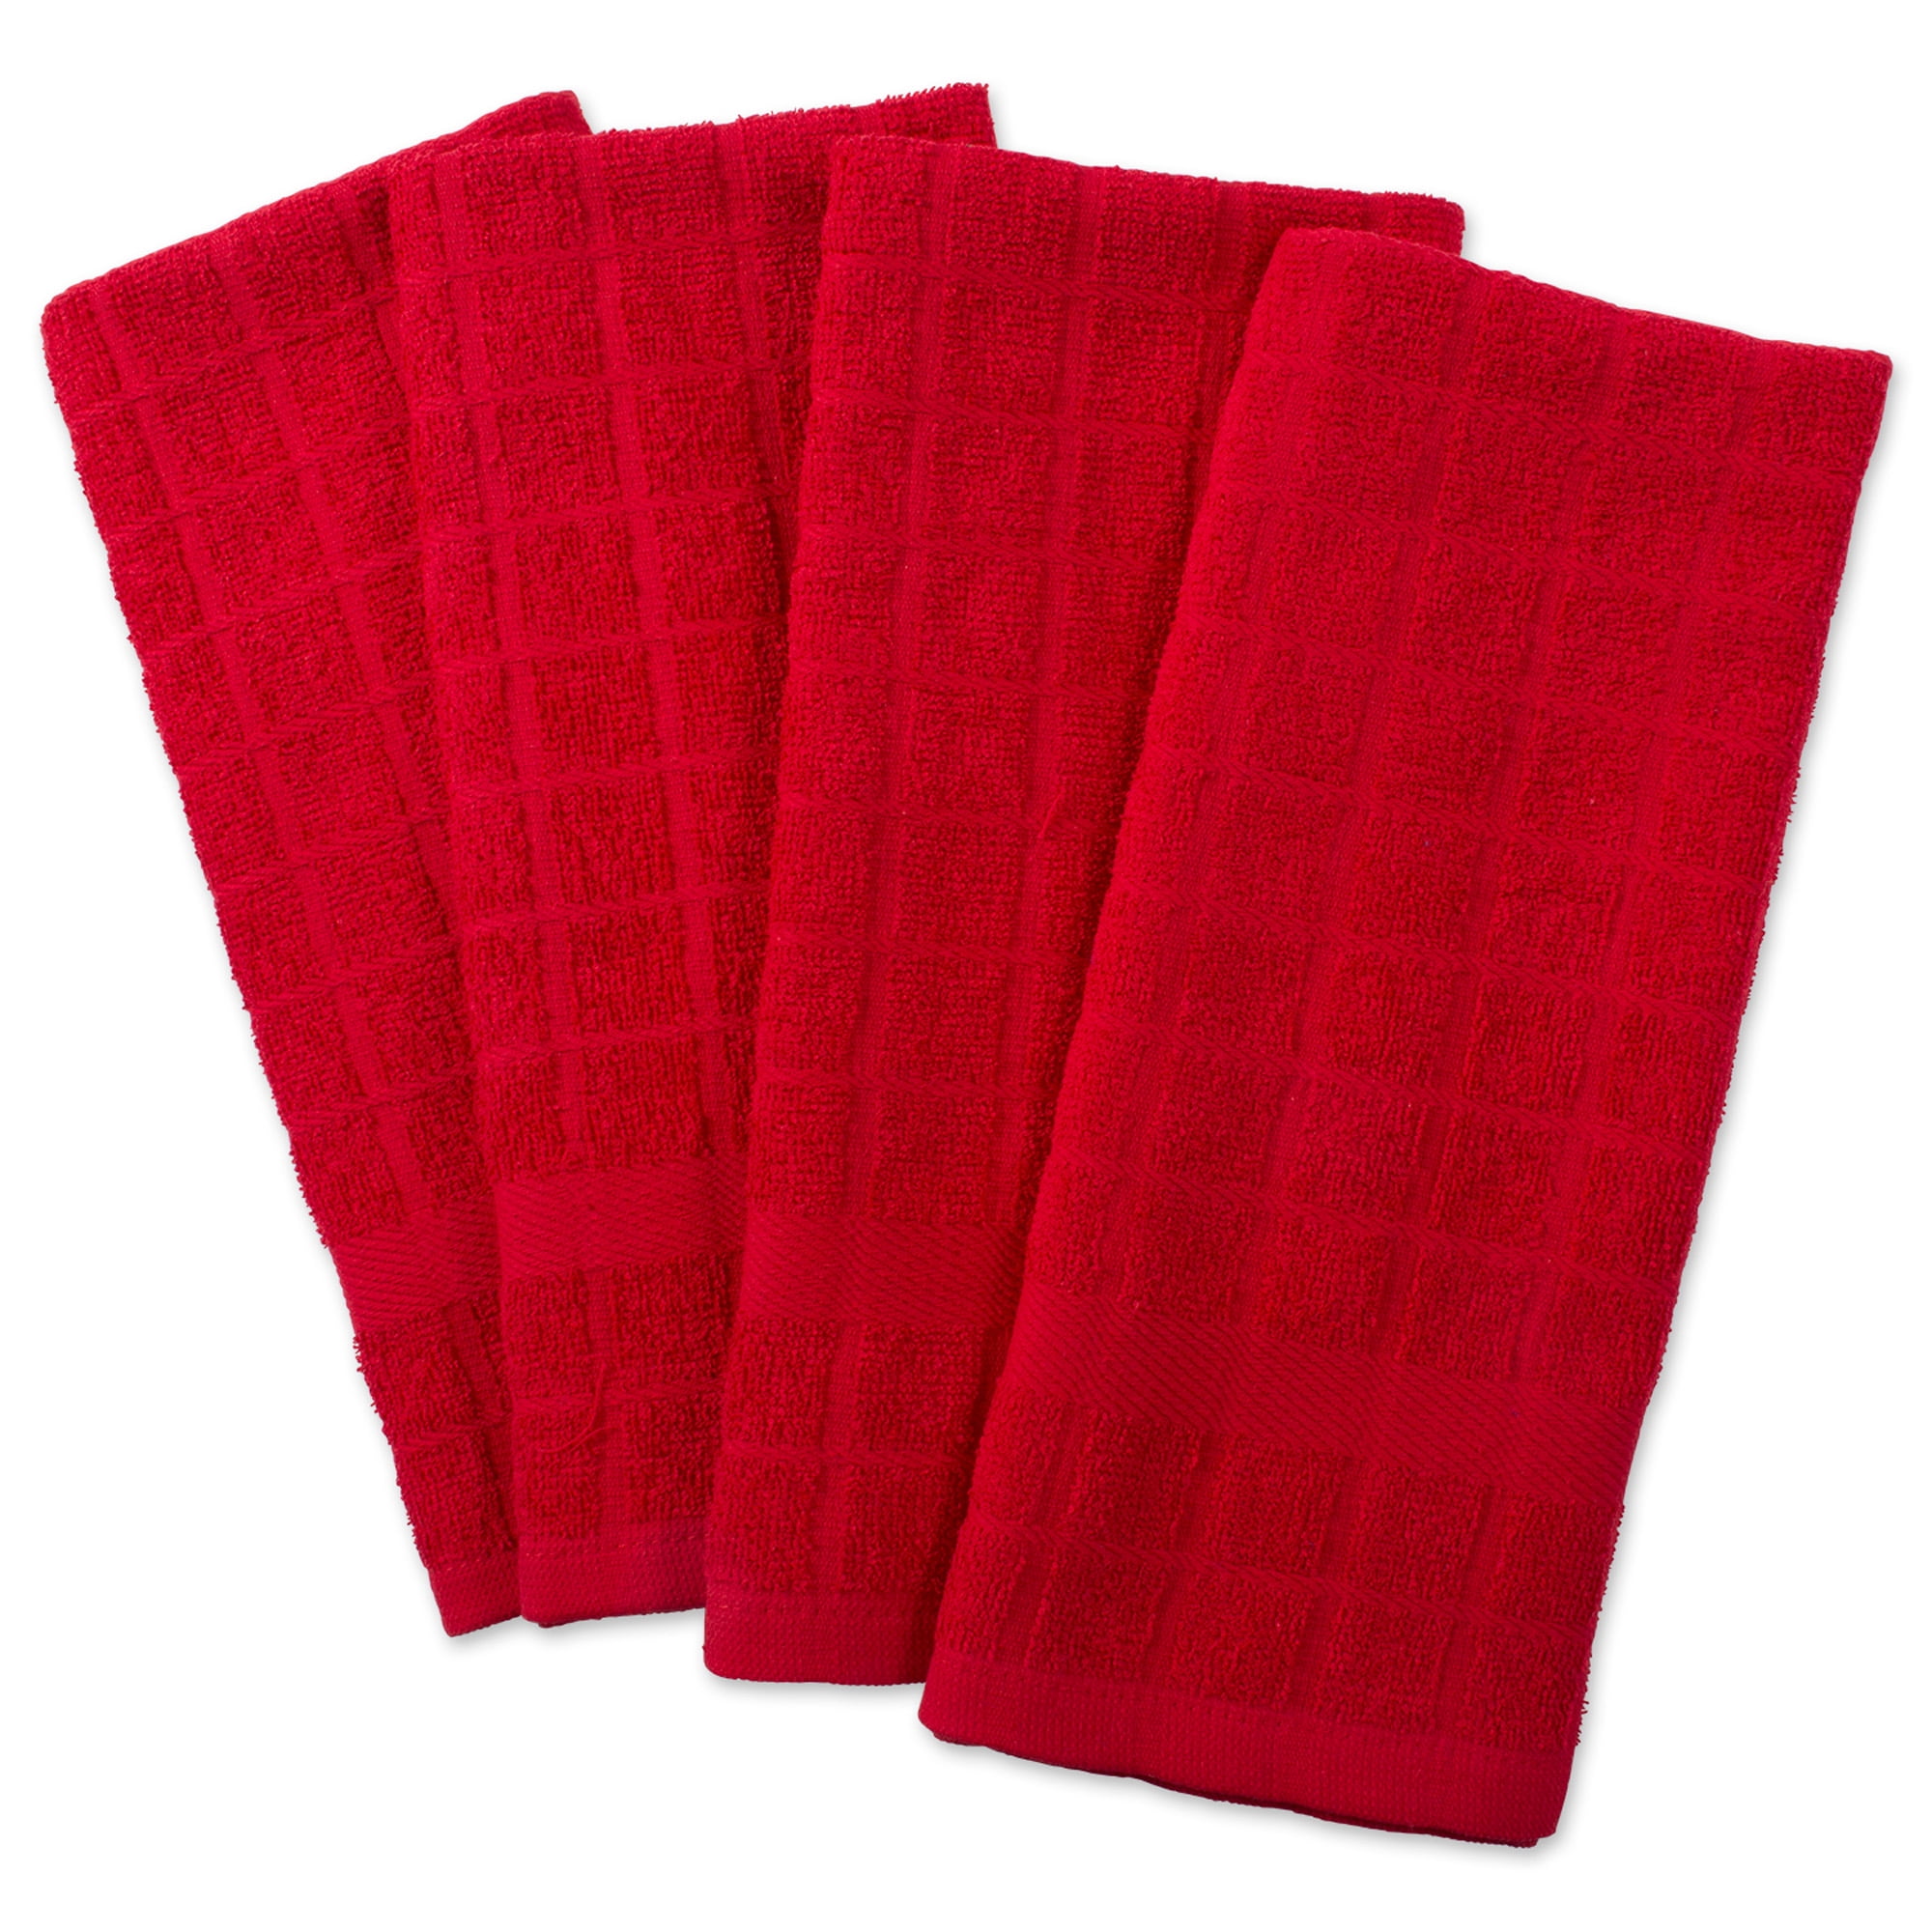 Design Imports Windowpane Terry Kitchen Towel 4-Pack - 9799501